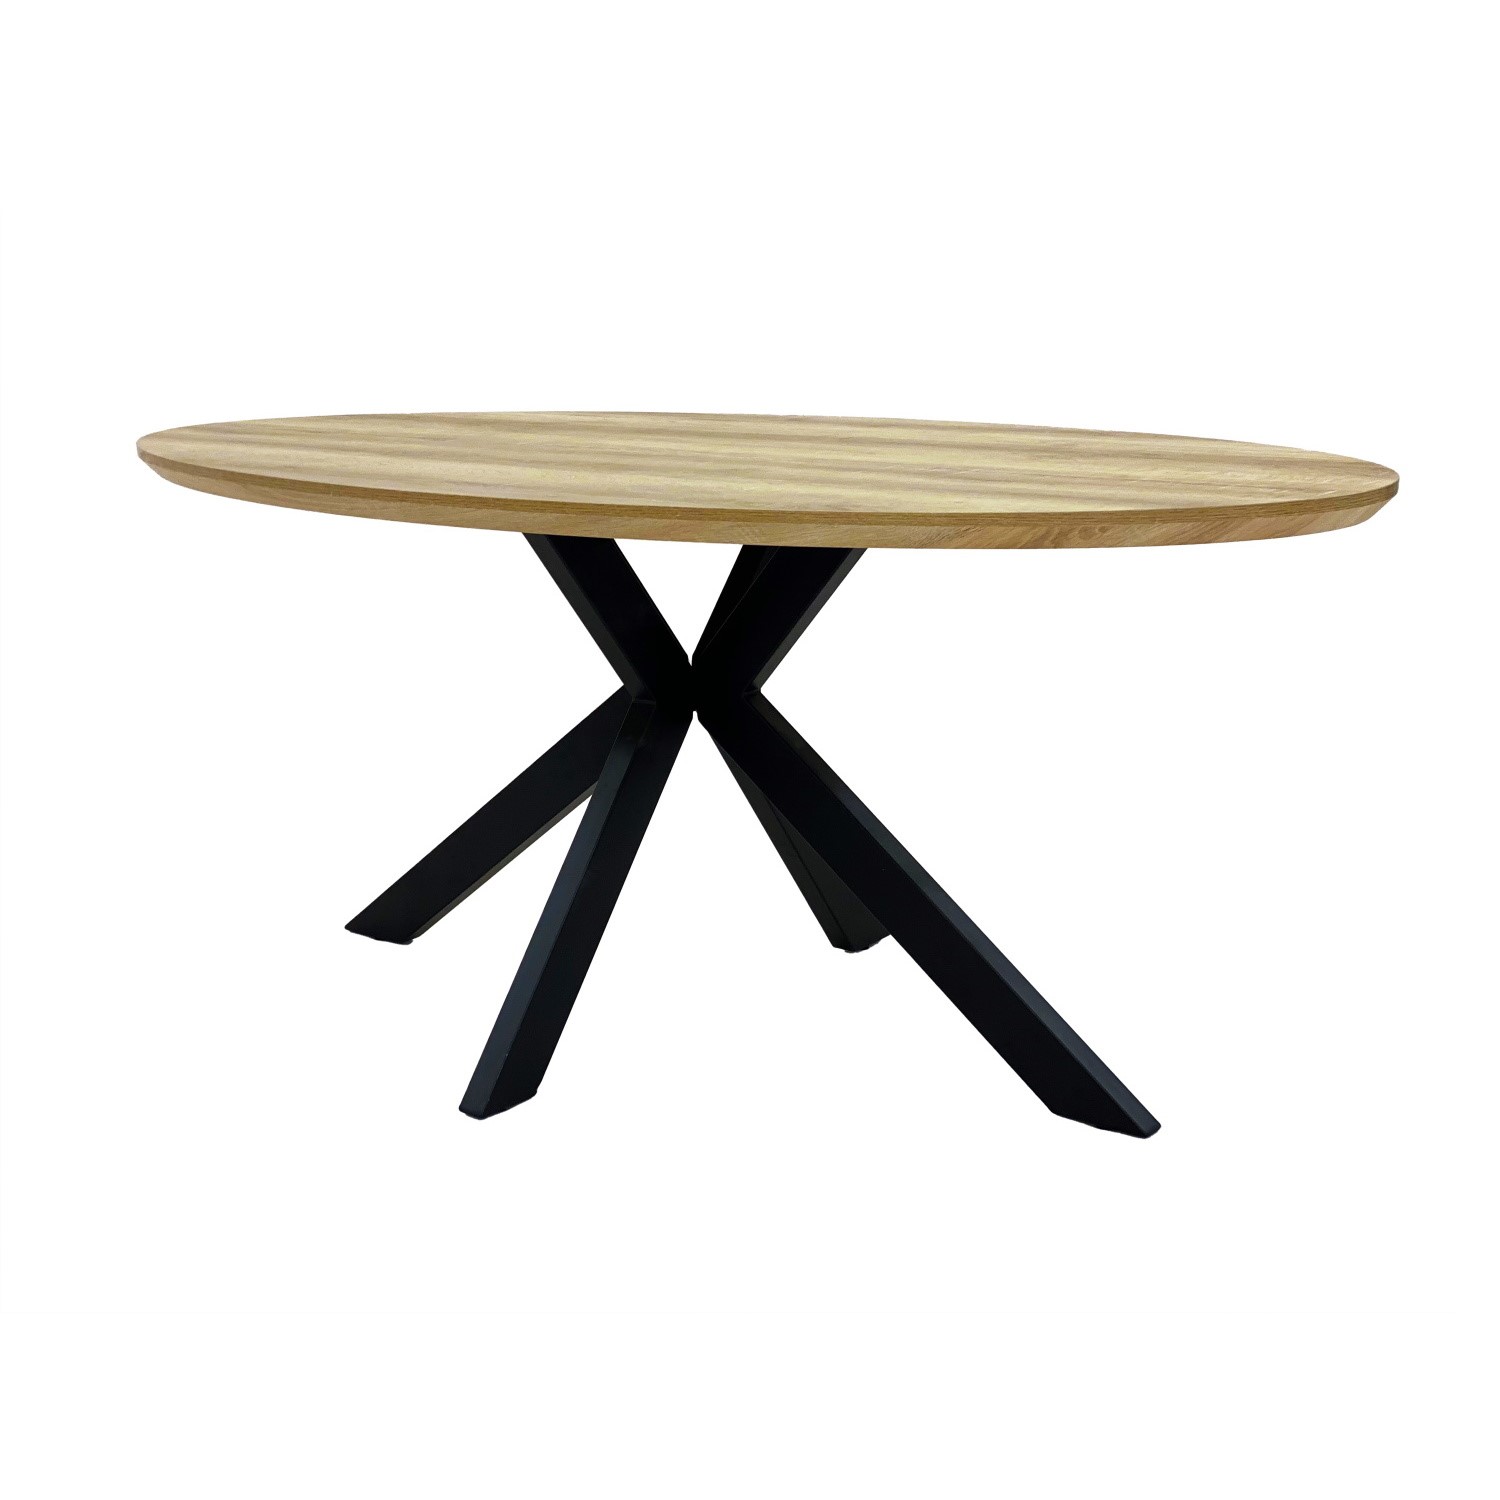 Read more about Large oval oak dining table seats 6 liberty